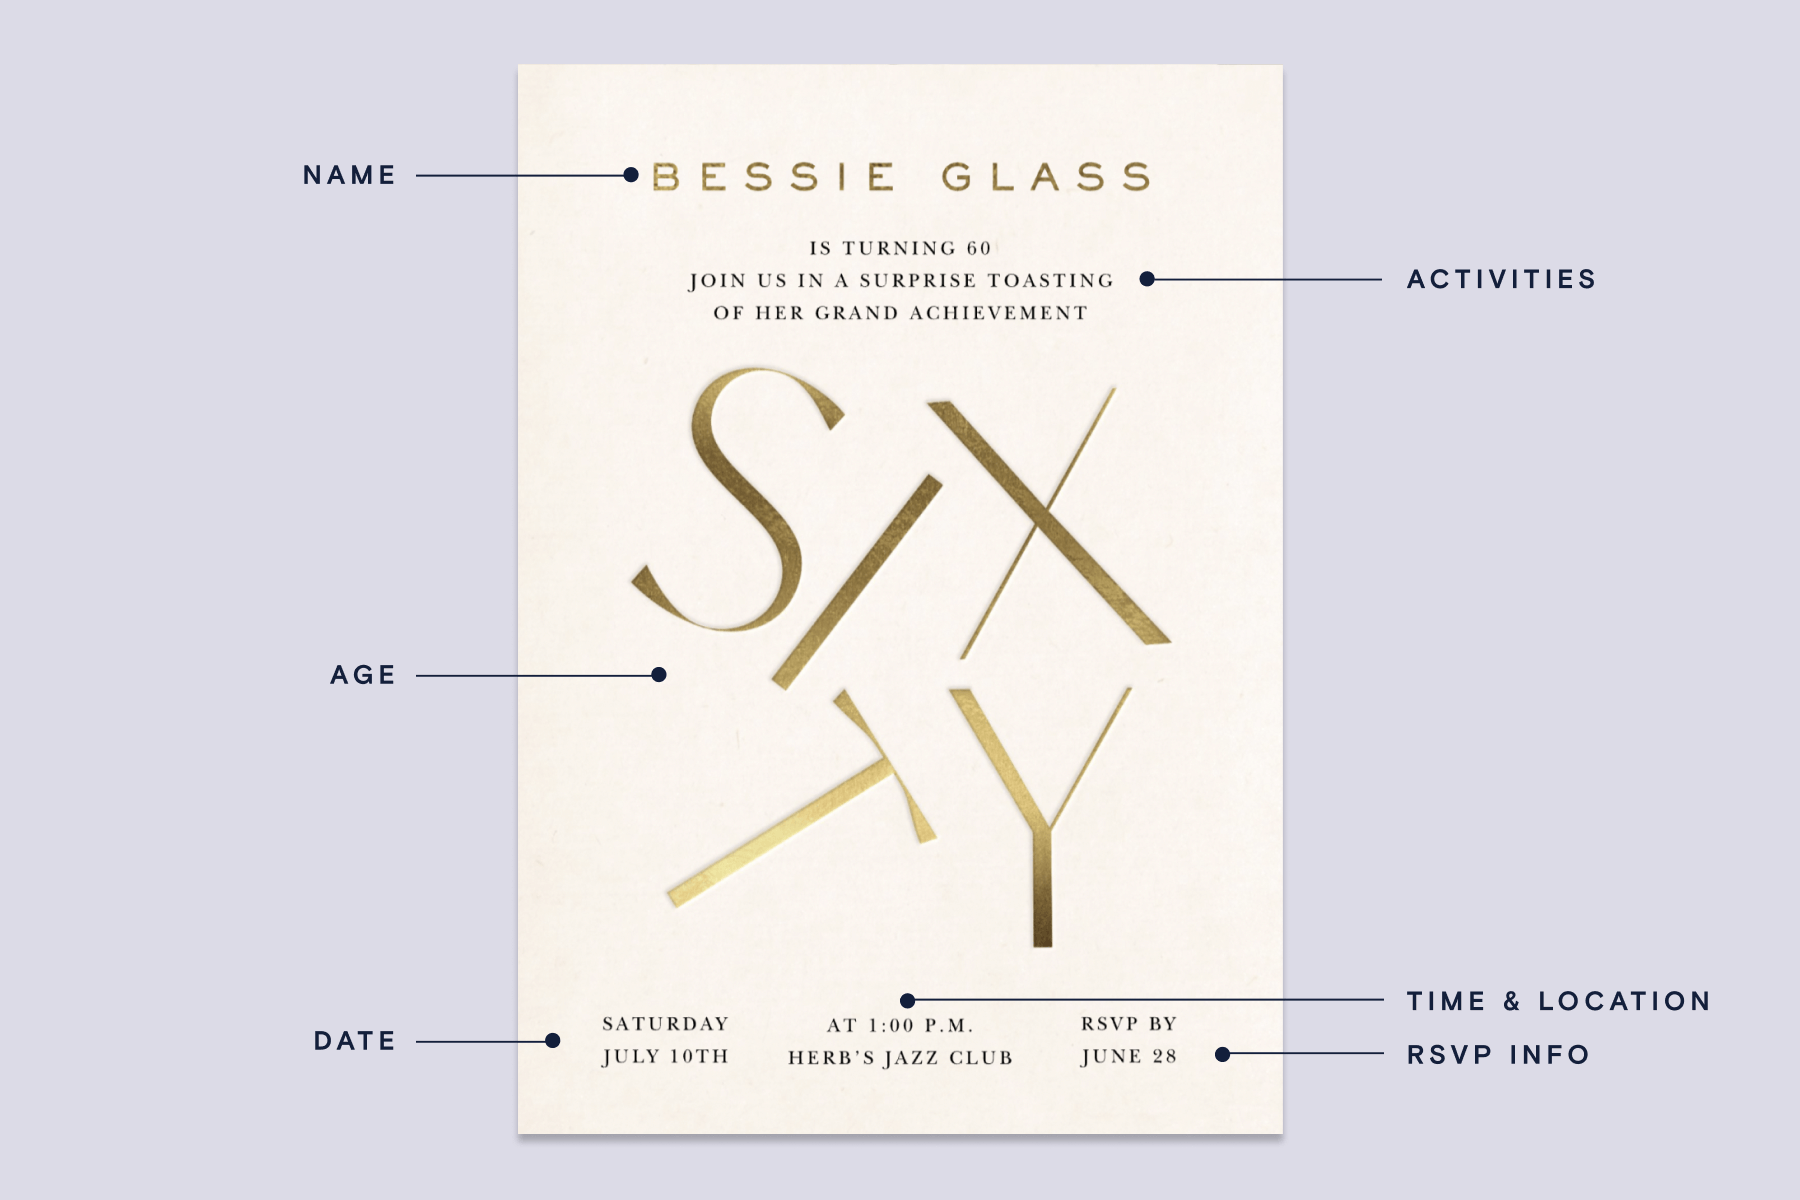 An adult birthday invitation with the word “Sixty” written in large gold text. The invitation includes a diagram of what to include, like the guest of honor’s name, the date and time, and activities.